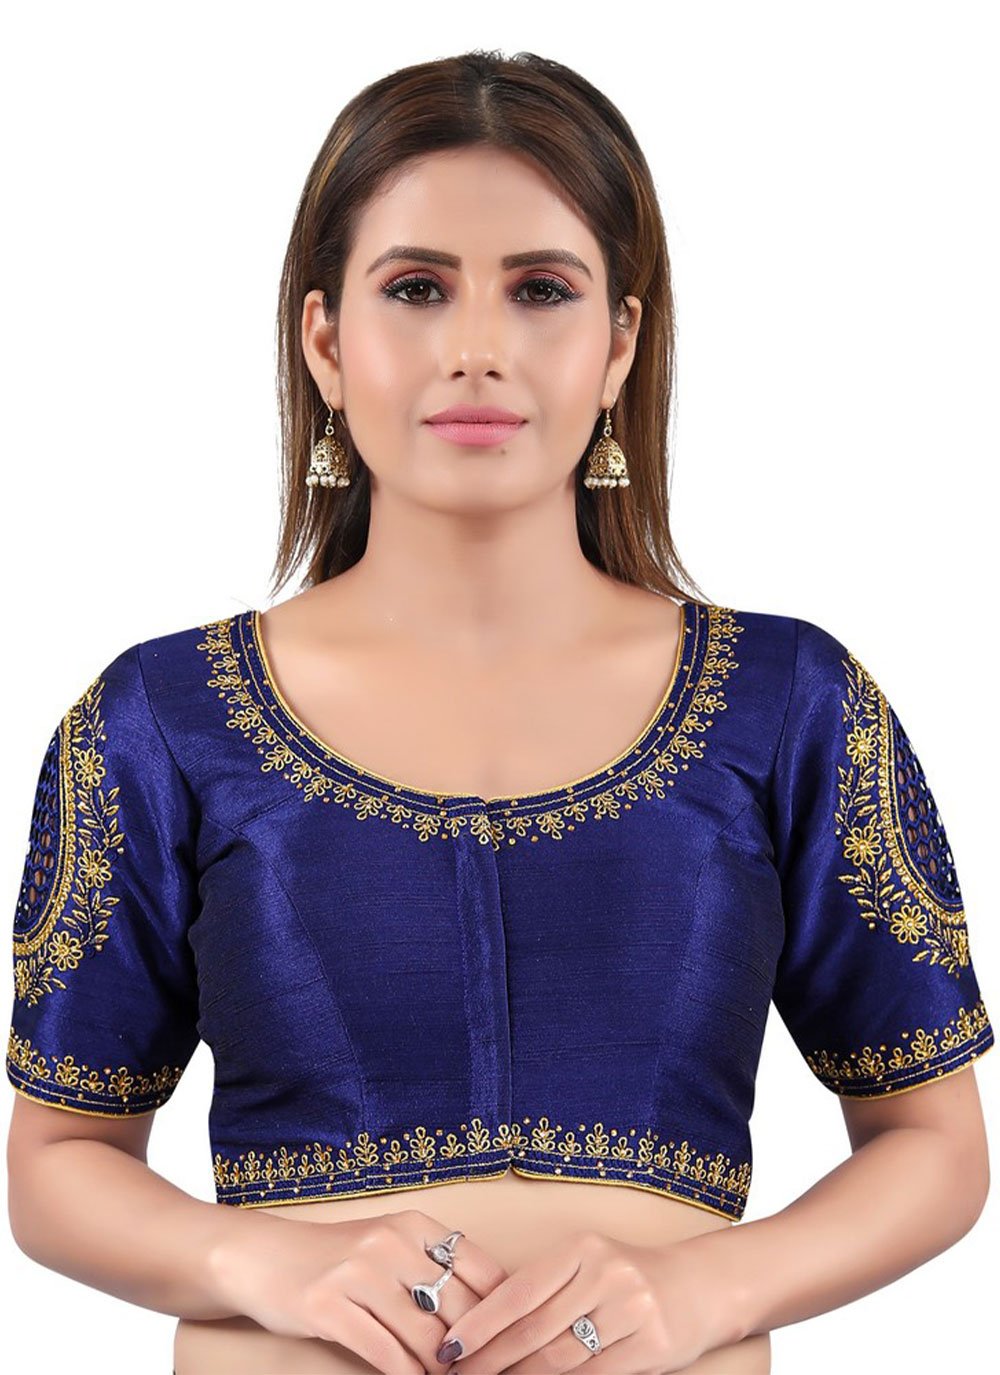 50X911-RO Blue Silk Designer Saree Blouse with Dori Ties, Deep ''U'' Back  with Floral Printed and Lace Work